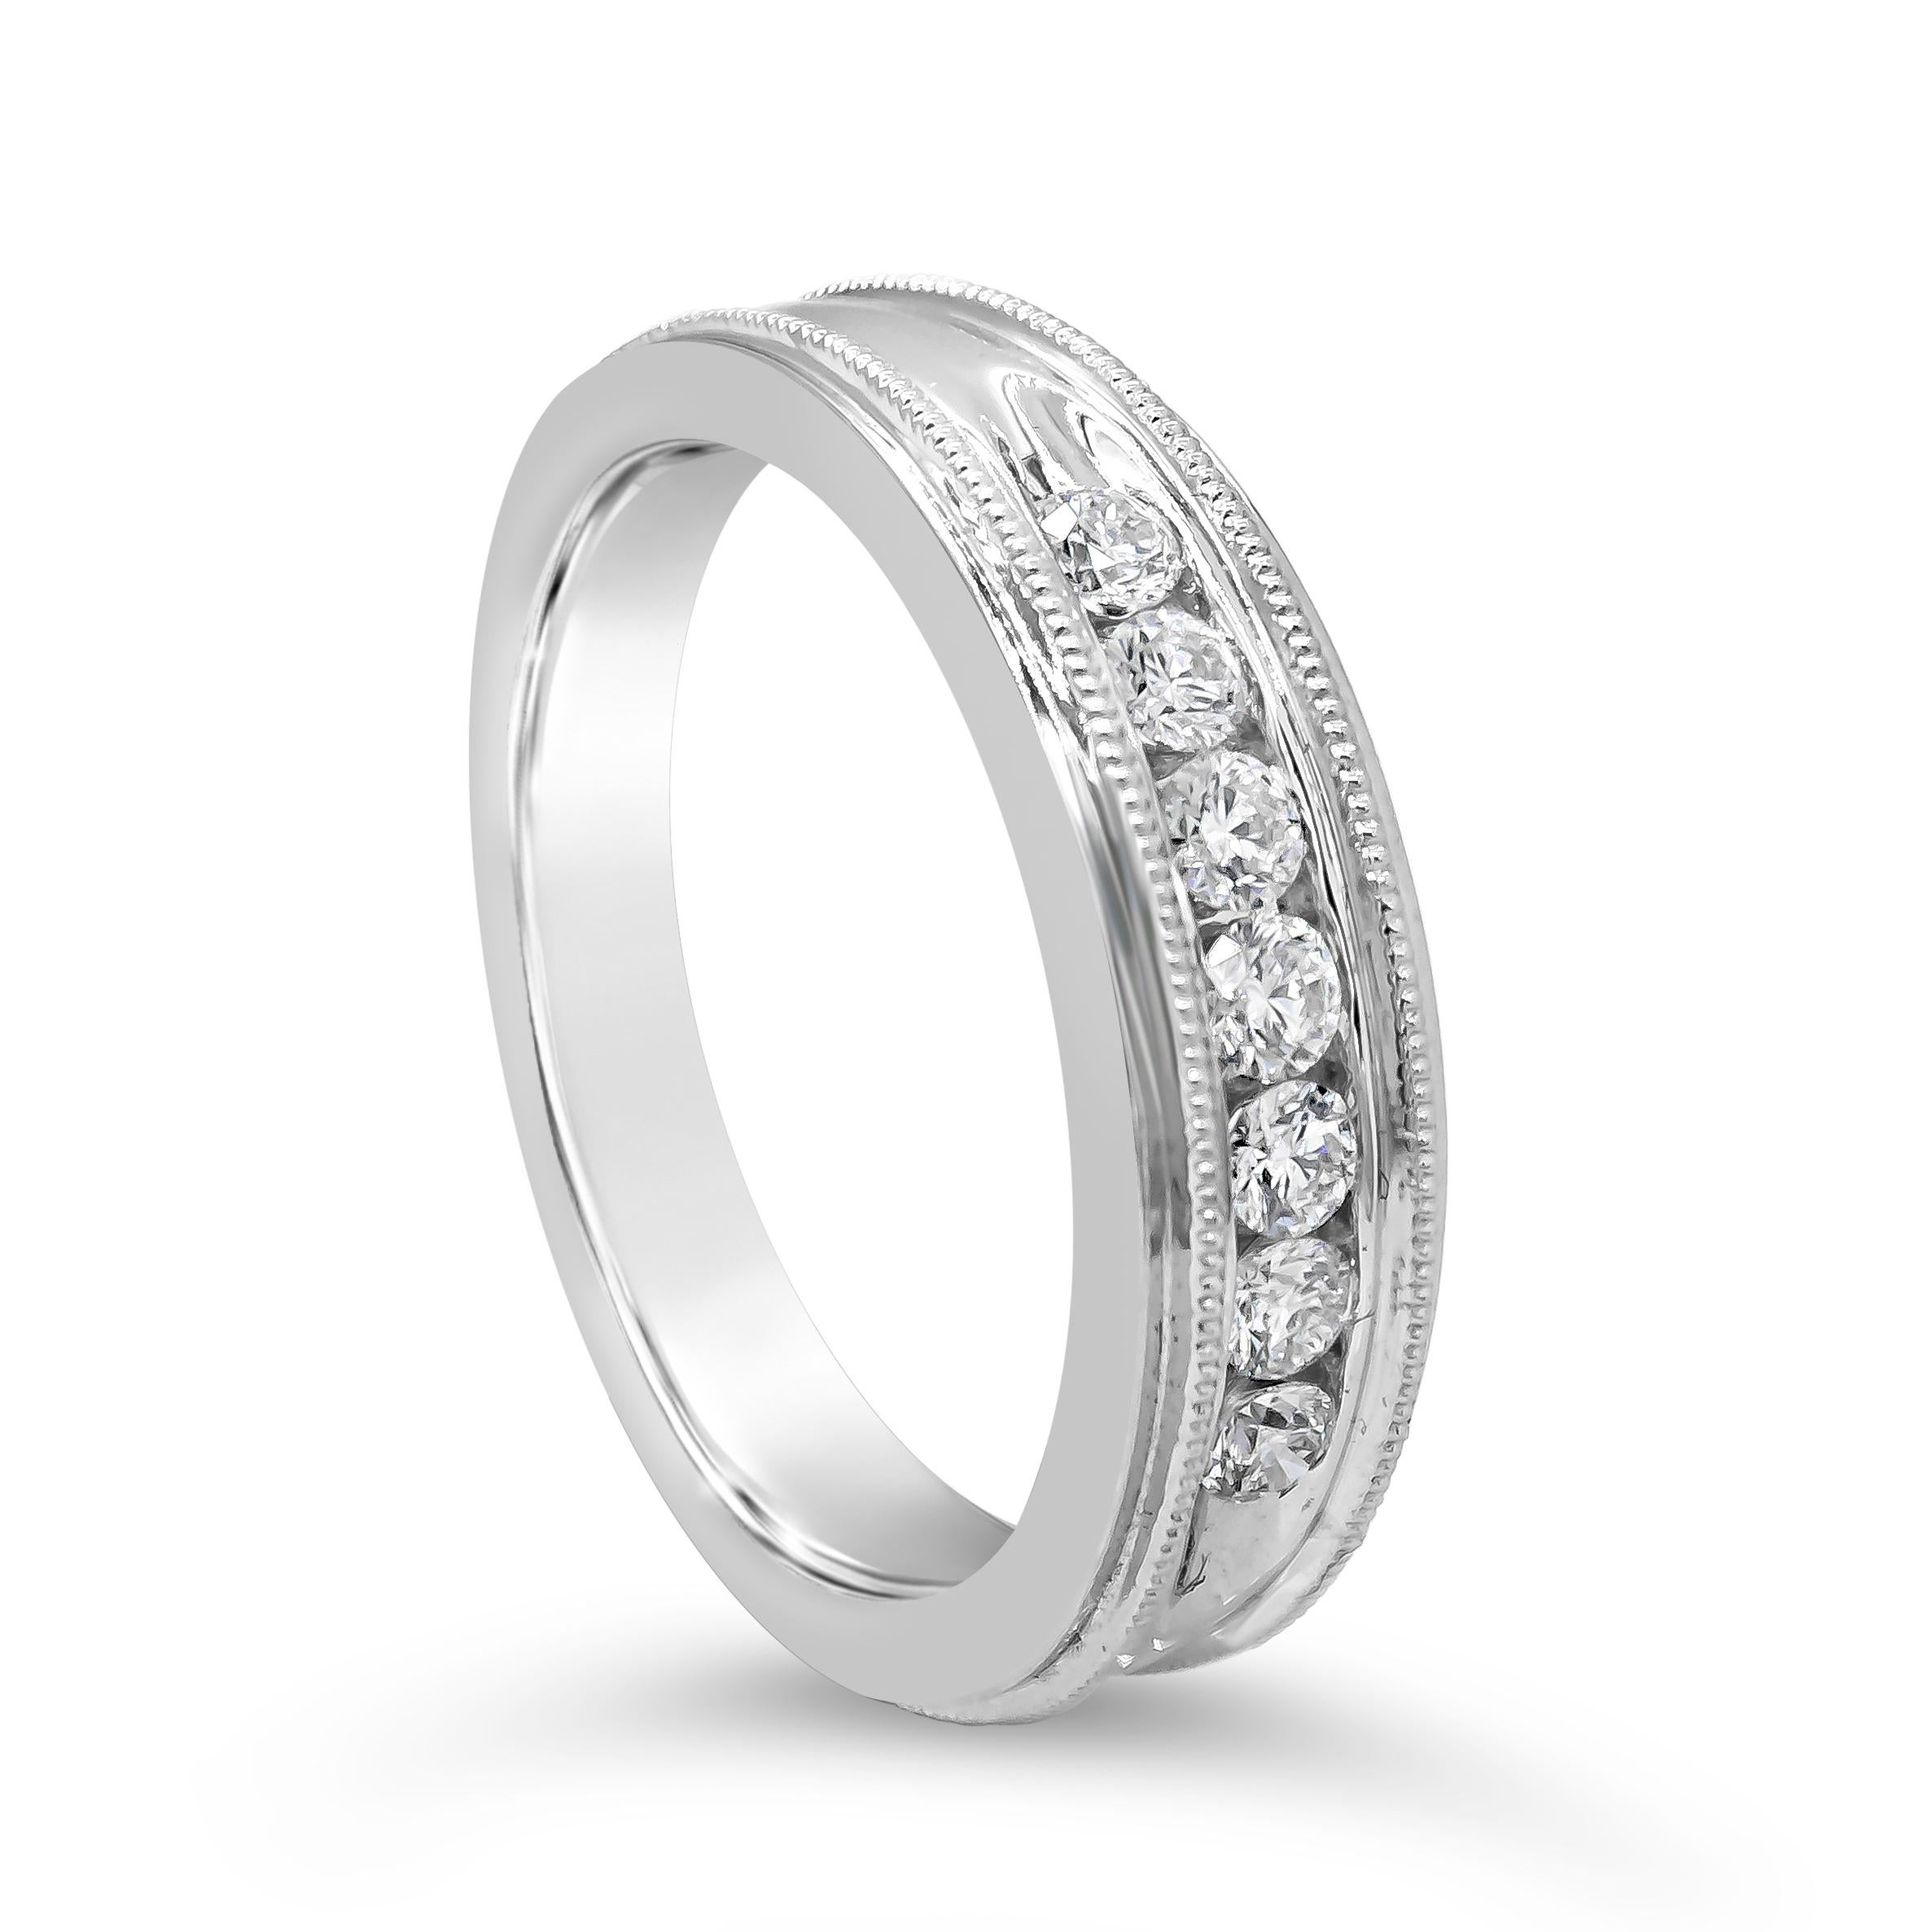 This classic men's wedding band style showcases seven brilliant round diamonds weighing 0.49 carats total, mounted in a channel setting. Finished with millgrain edges. Made with 18K White Gold. Size 10.5 US.

Style available in different price